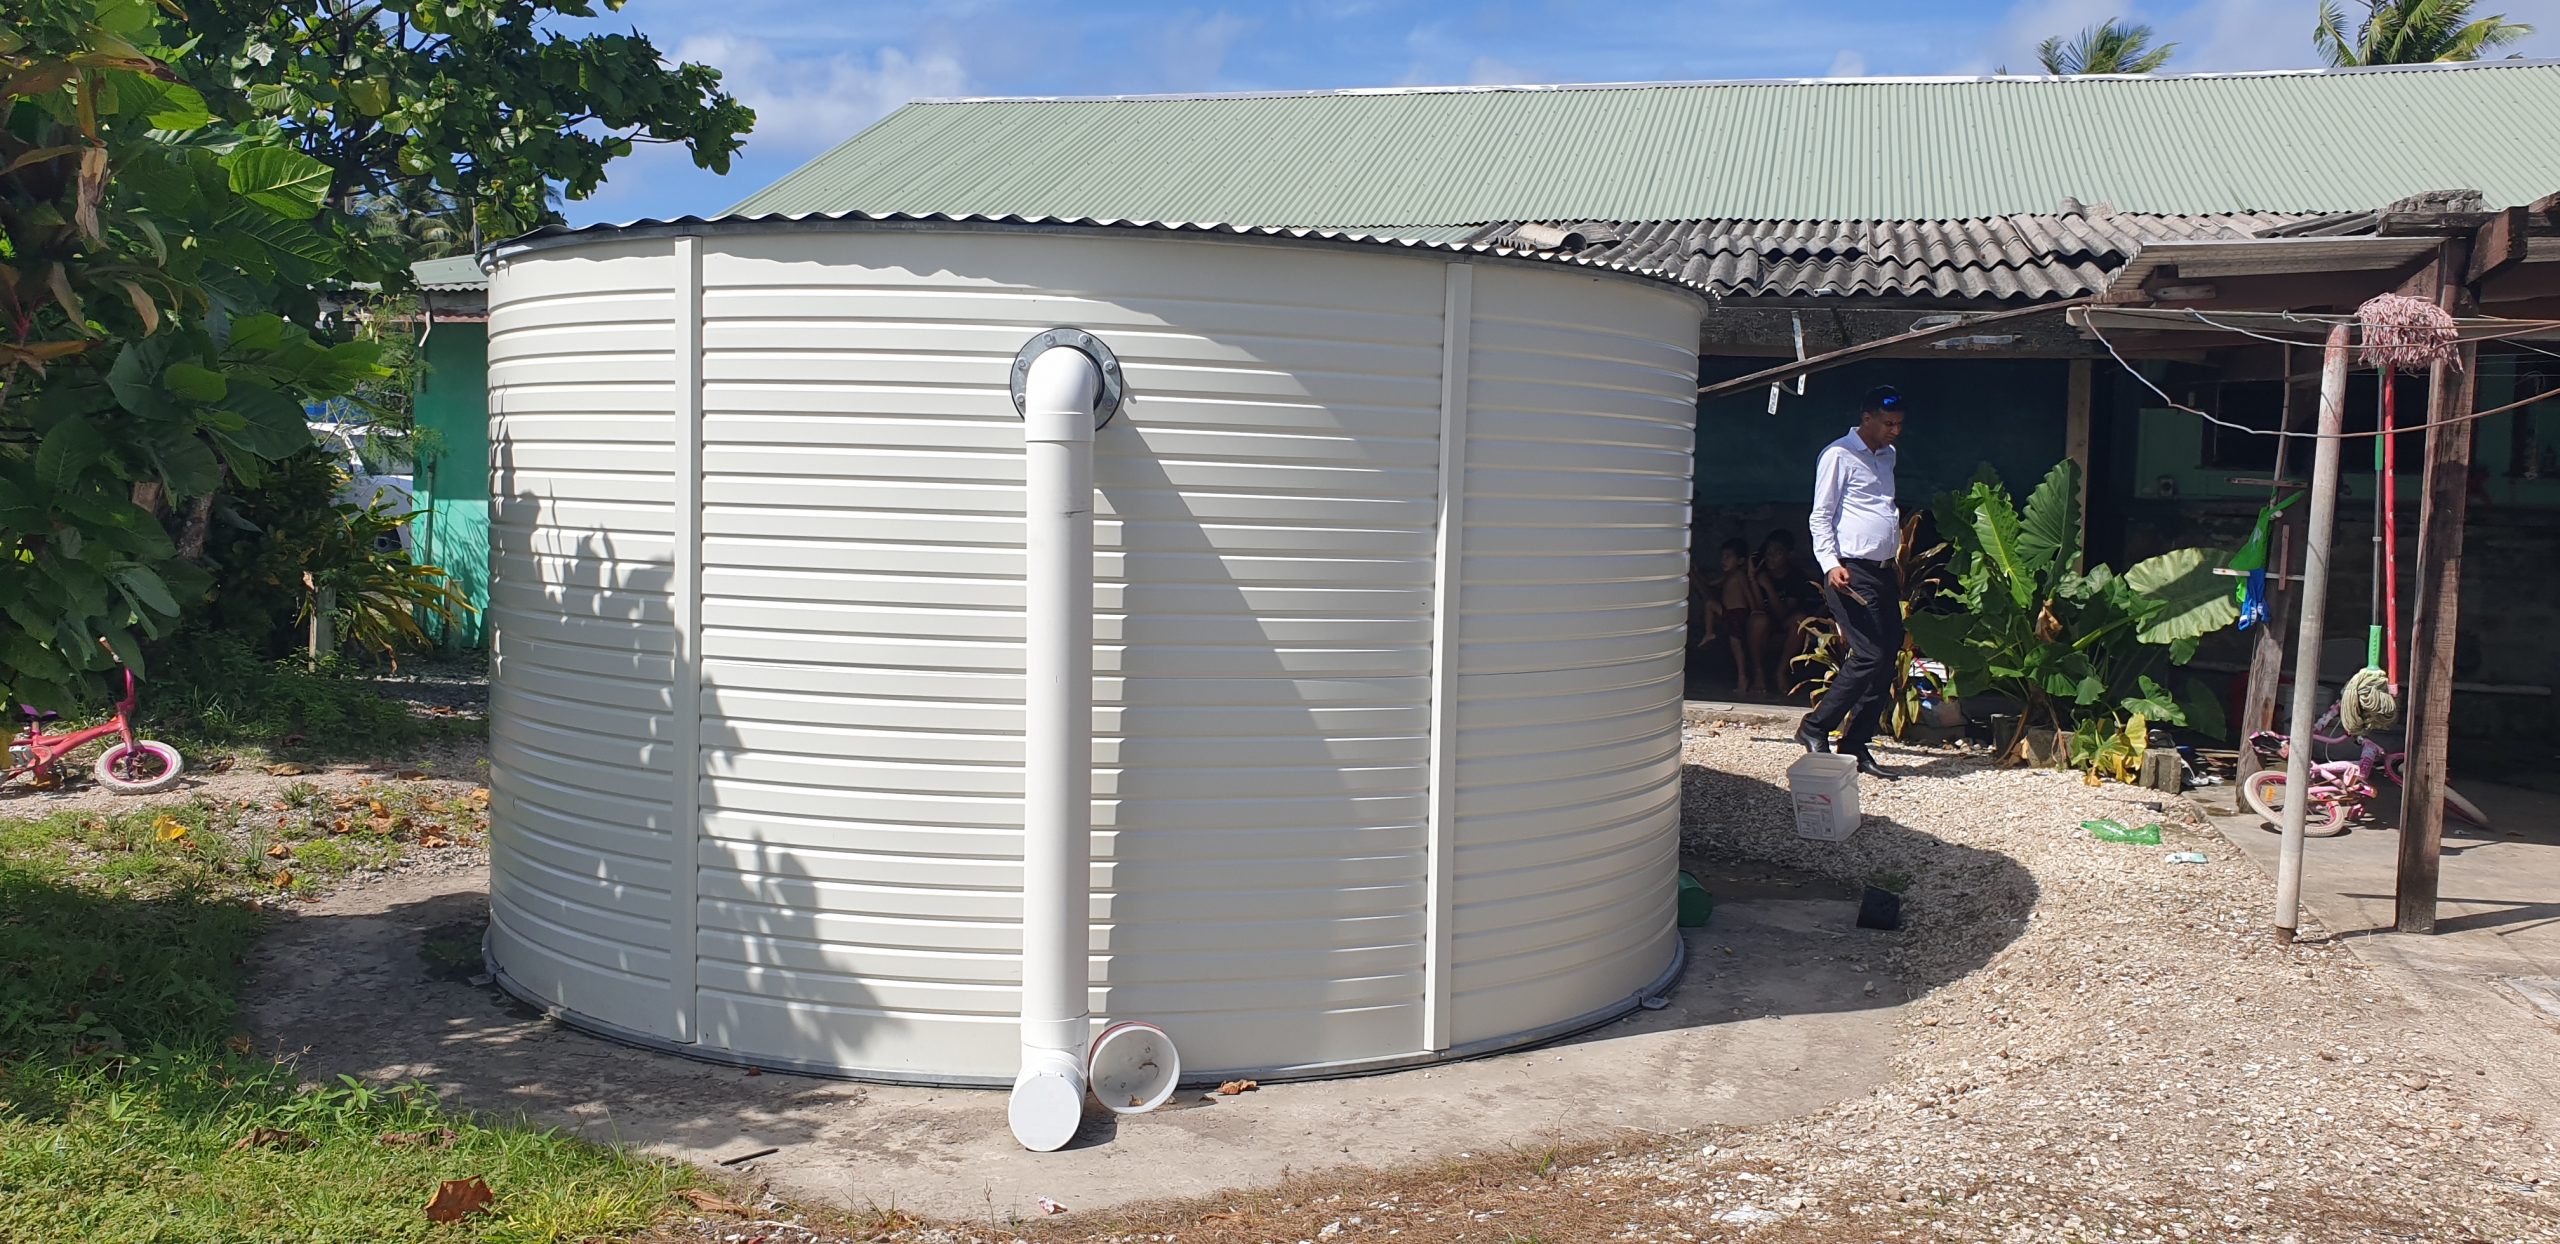 Scaling up water storage capacity in Nauru in response to climate change: Assisting the most vulnerable in a systematic way